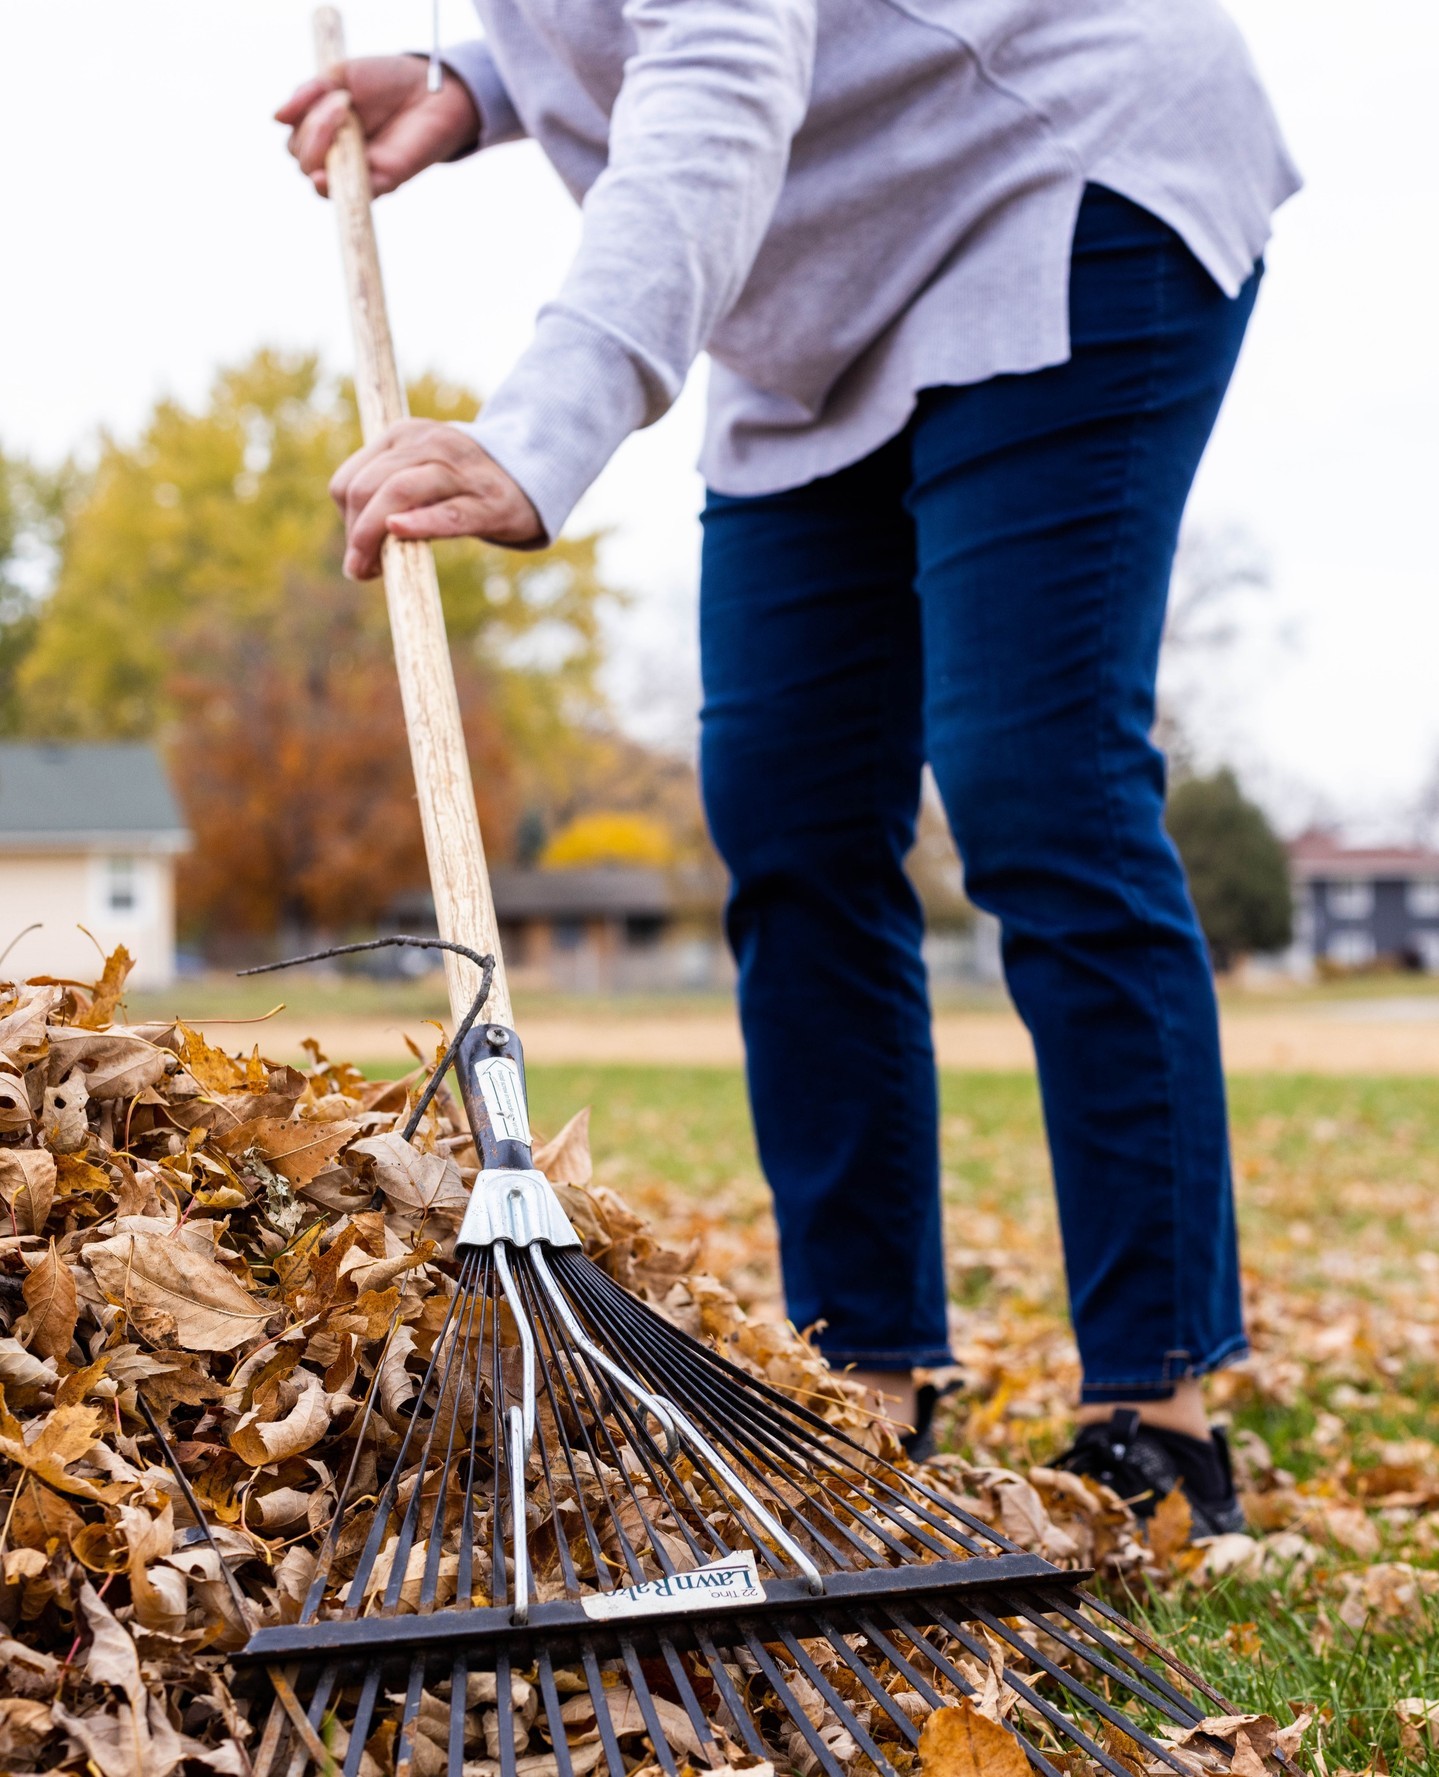 3 Ways You Can #CareForPlace This Fall:⁠⁠ Collect and Compost Leaves ⁠Instead of bagging and sending your fallen leaves to the landfill, use them as a resource. Collect leaves and create a compost pile or bin. Did you know? The resulting leaf mold can be used as a natural soil conditioner in the spring.⁠⁠ Leave Some Leaves⁠You don't have to remove all the leaves from your lawn. Leaving a layer of leaves can benefit the ecosystem by providing a habitat for insects and other small creatures.  Tip: Use a mulching lawnmower to chop them into smaller pieces, which will break down more quickly.⁠⁠ Use Natural Fertilizers⁠Opt for organic and natural fertilizers, such as compost or well-rotted manure, to nourish your soil.  Avoid chemical fertilizers that can harm the environment and waterways. — from Instagram